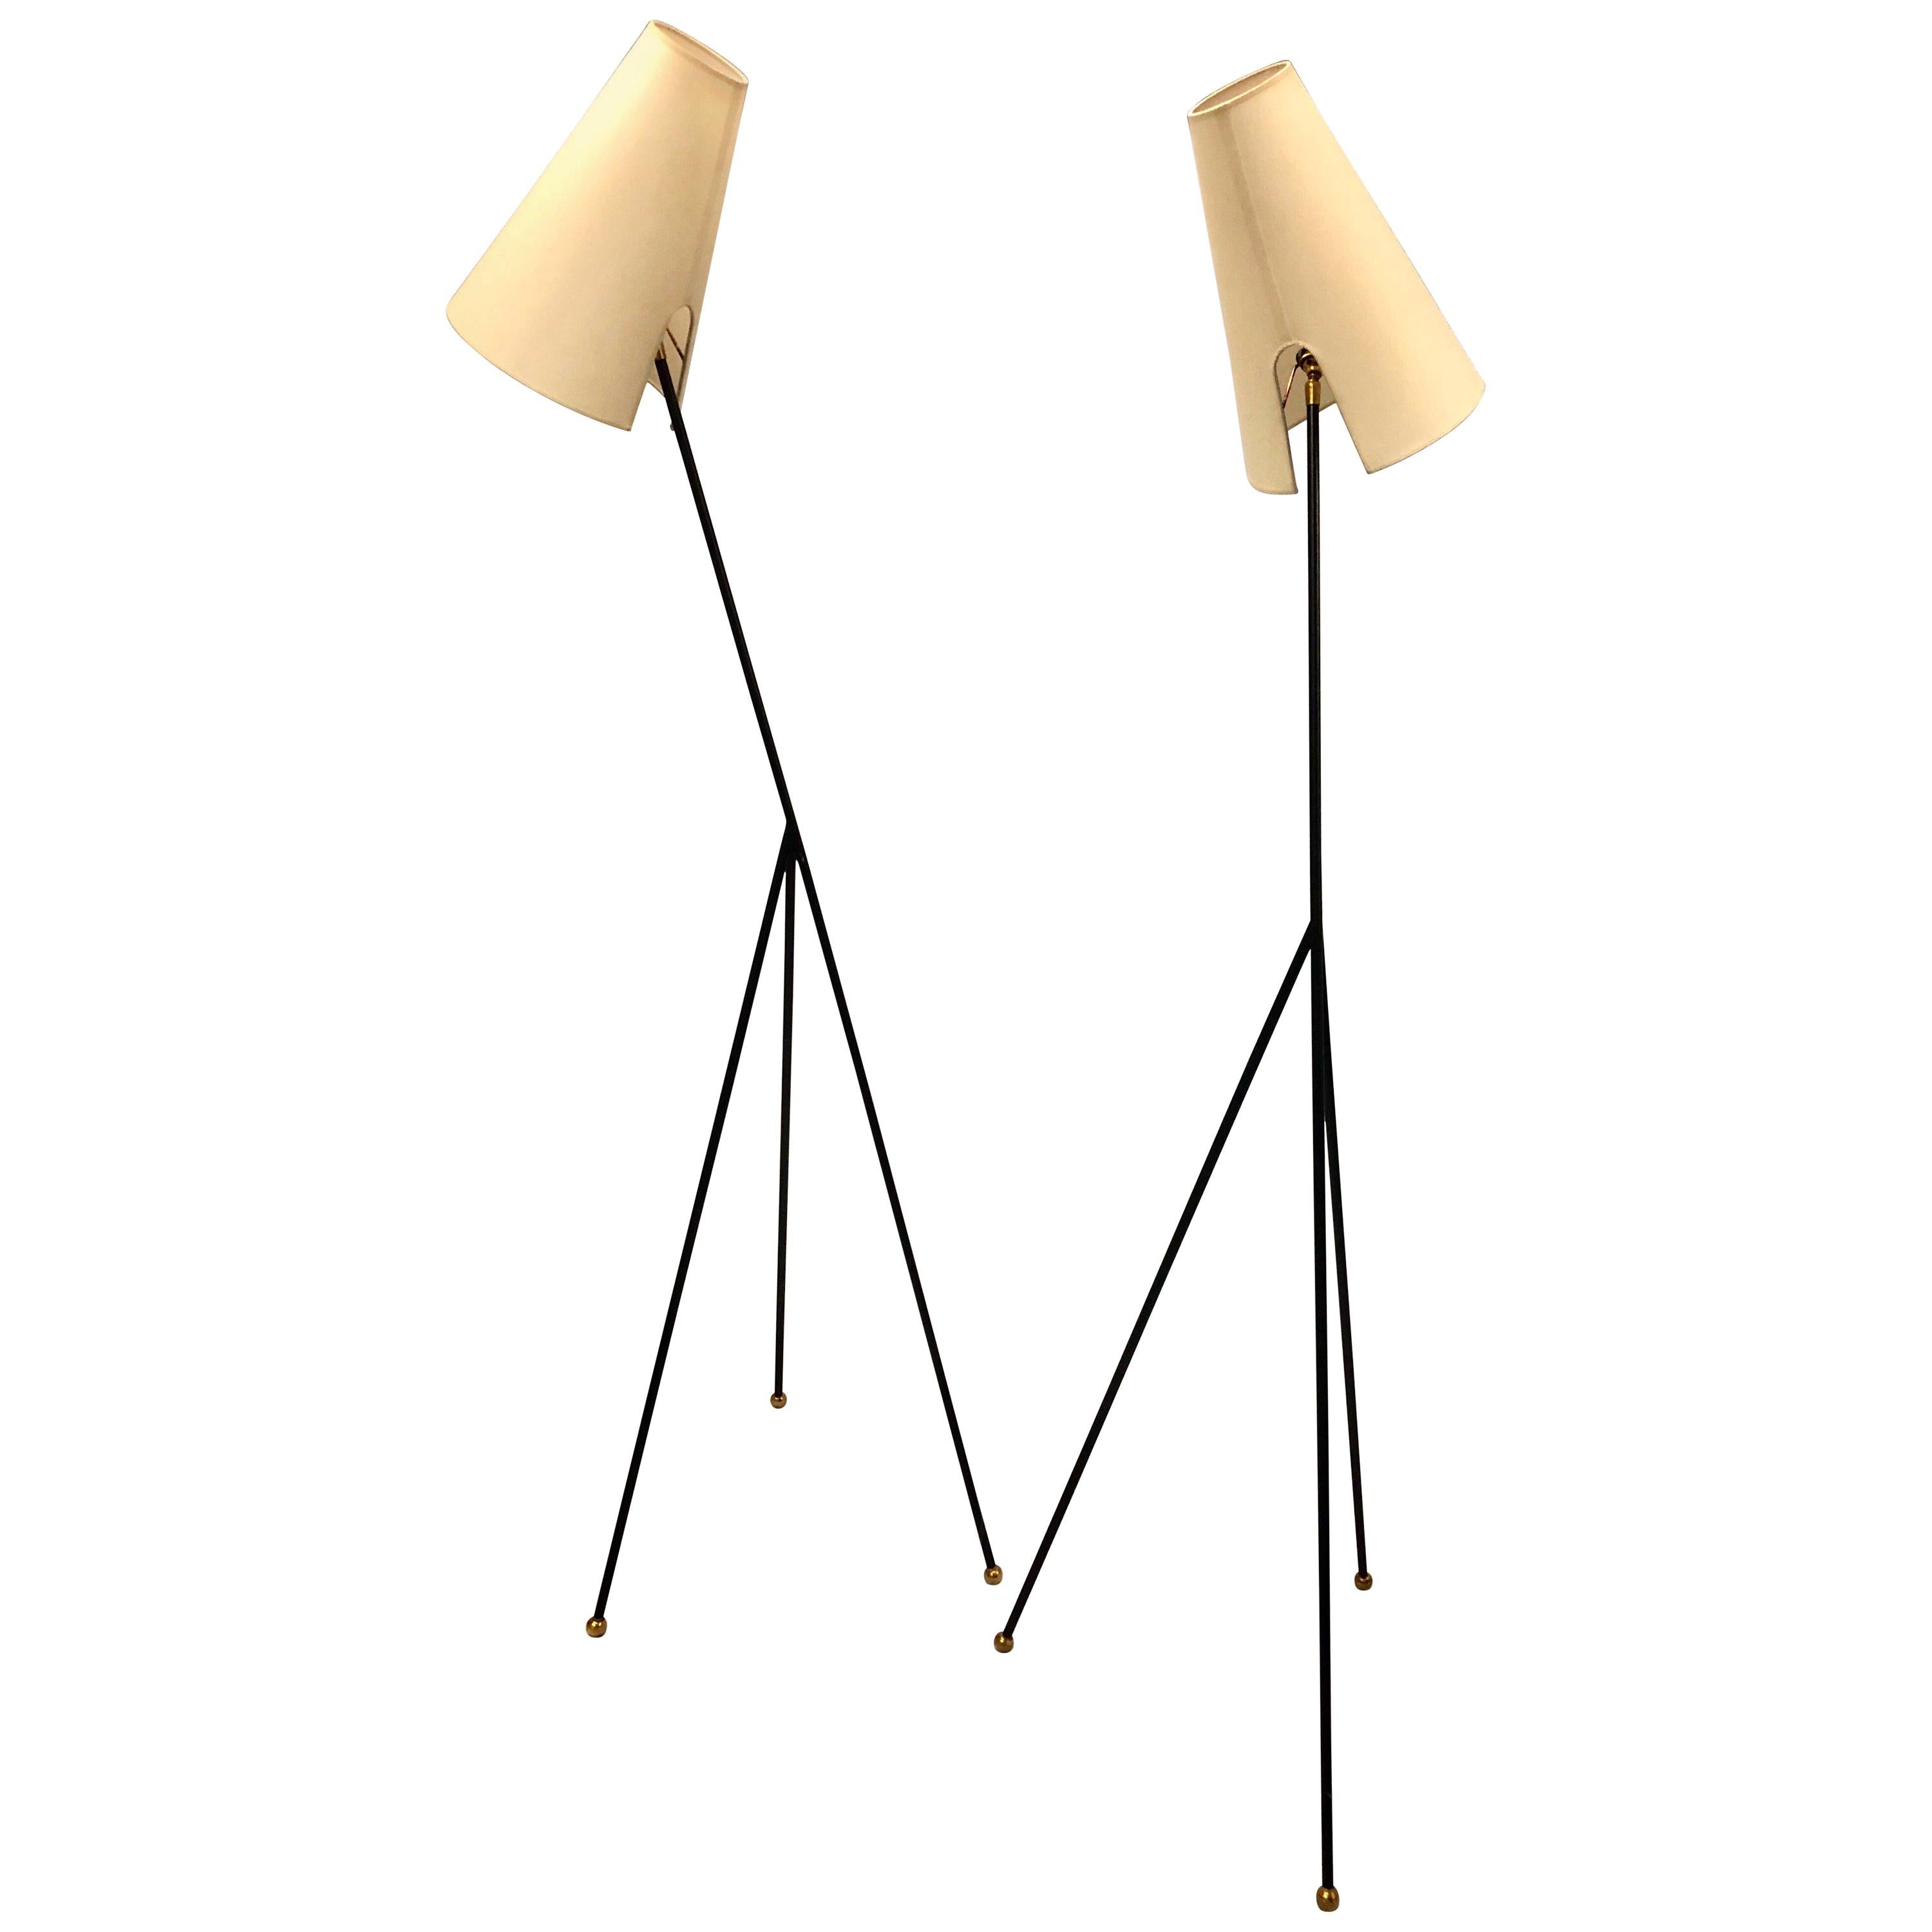 Elegant, sculptural French Mid-Century Modern enameled wrought iron floor lamp attributed to Disderot. The standing lamp has a stunning triangulated form, elegant tapered legs terminating in brass ball finials and finished with conical shades that